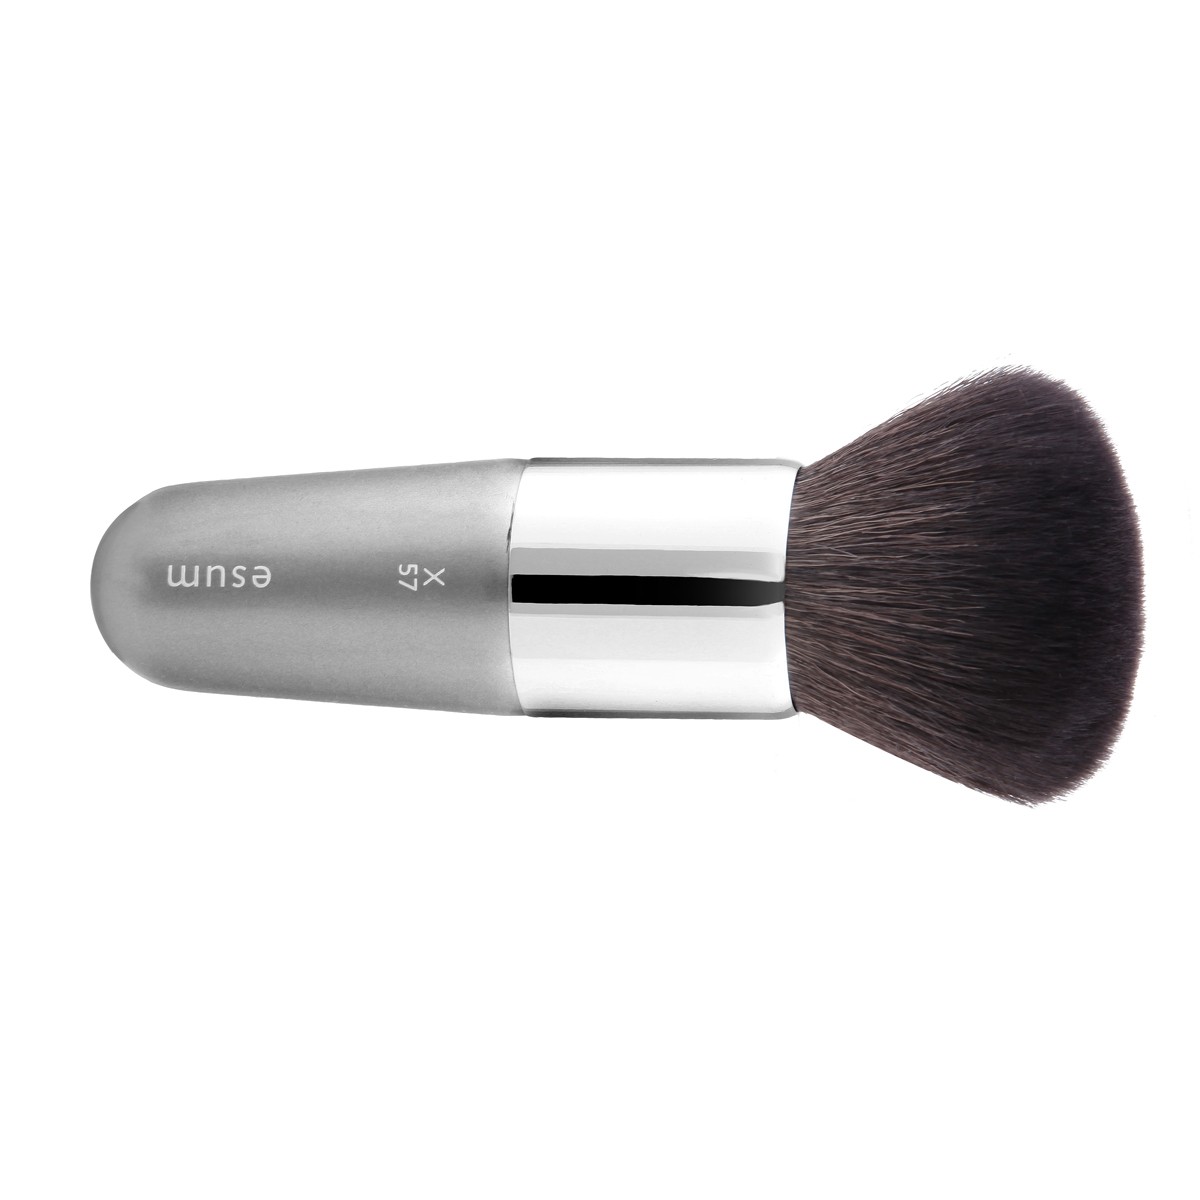 Favorite Beauty Tool – The Diffuser Brush by MuseBeauty.Pro